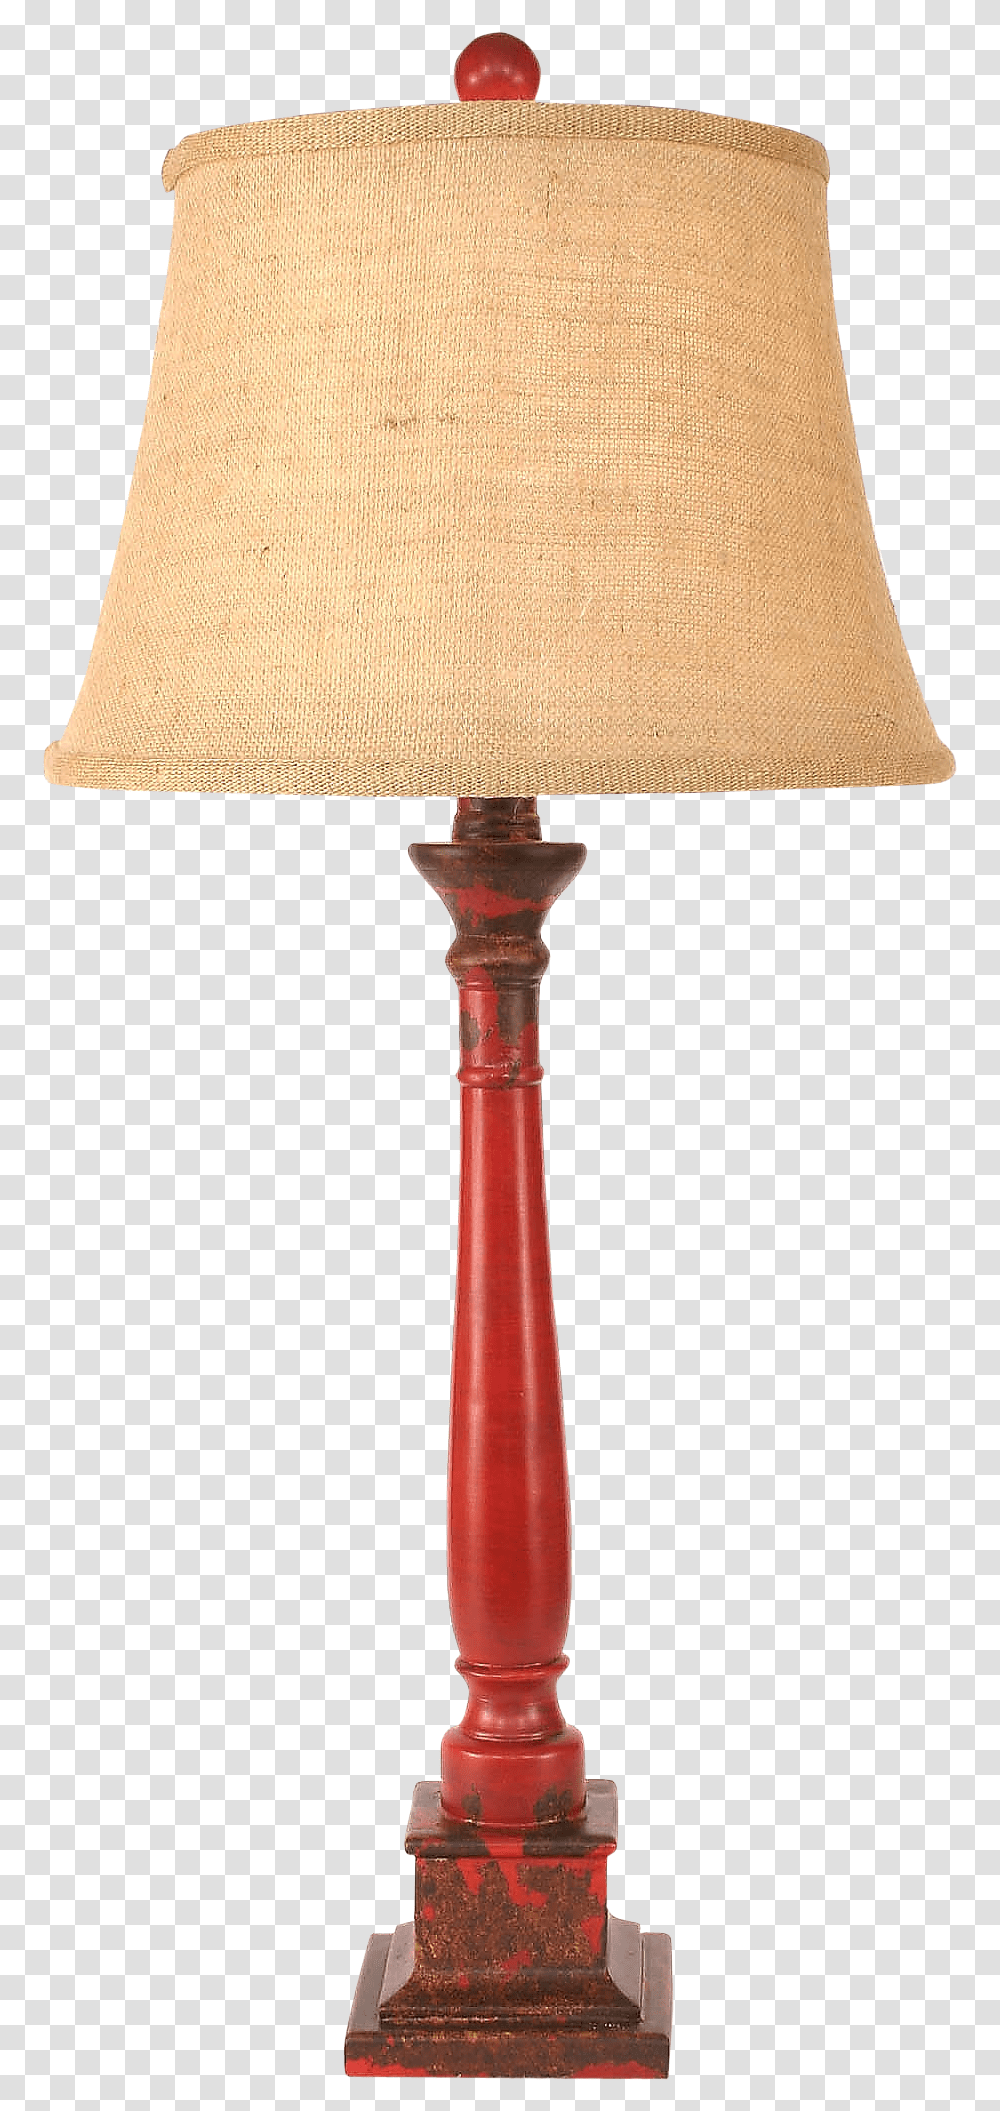 Aged Brick Red Square Candlestick Table Lamp Lamp, Lampshade Transparent Png